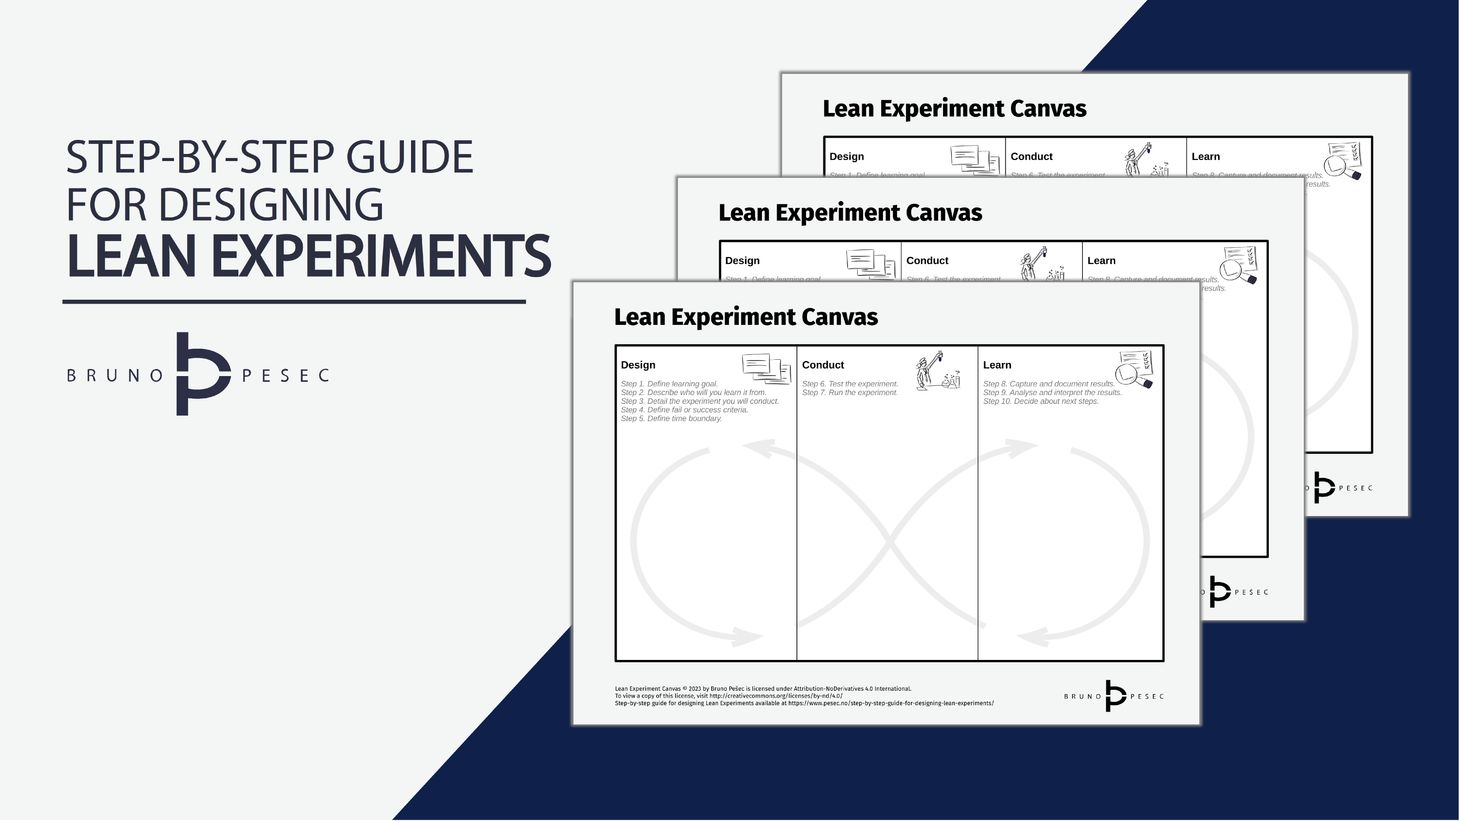 Step-by-step guide for designing Lean Experiments